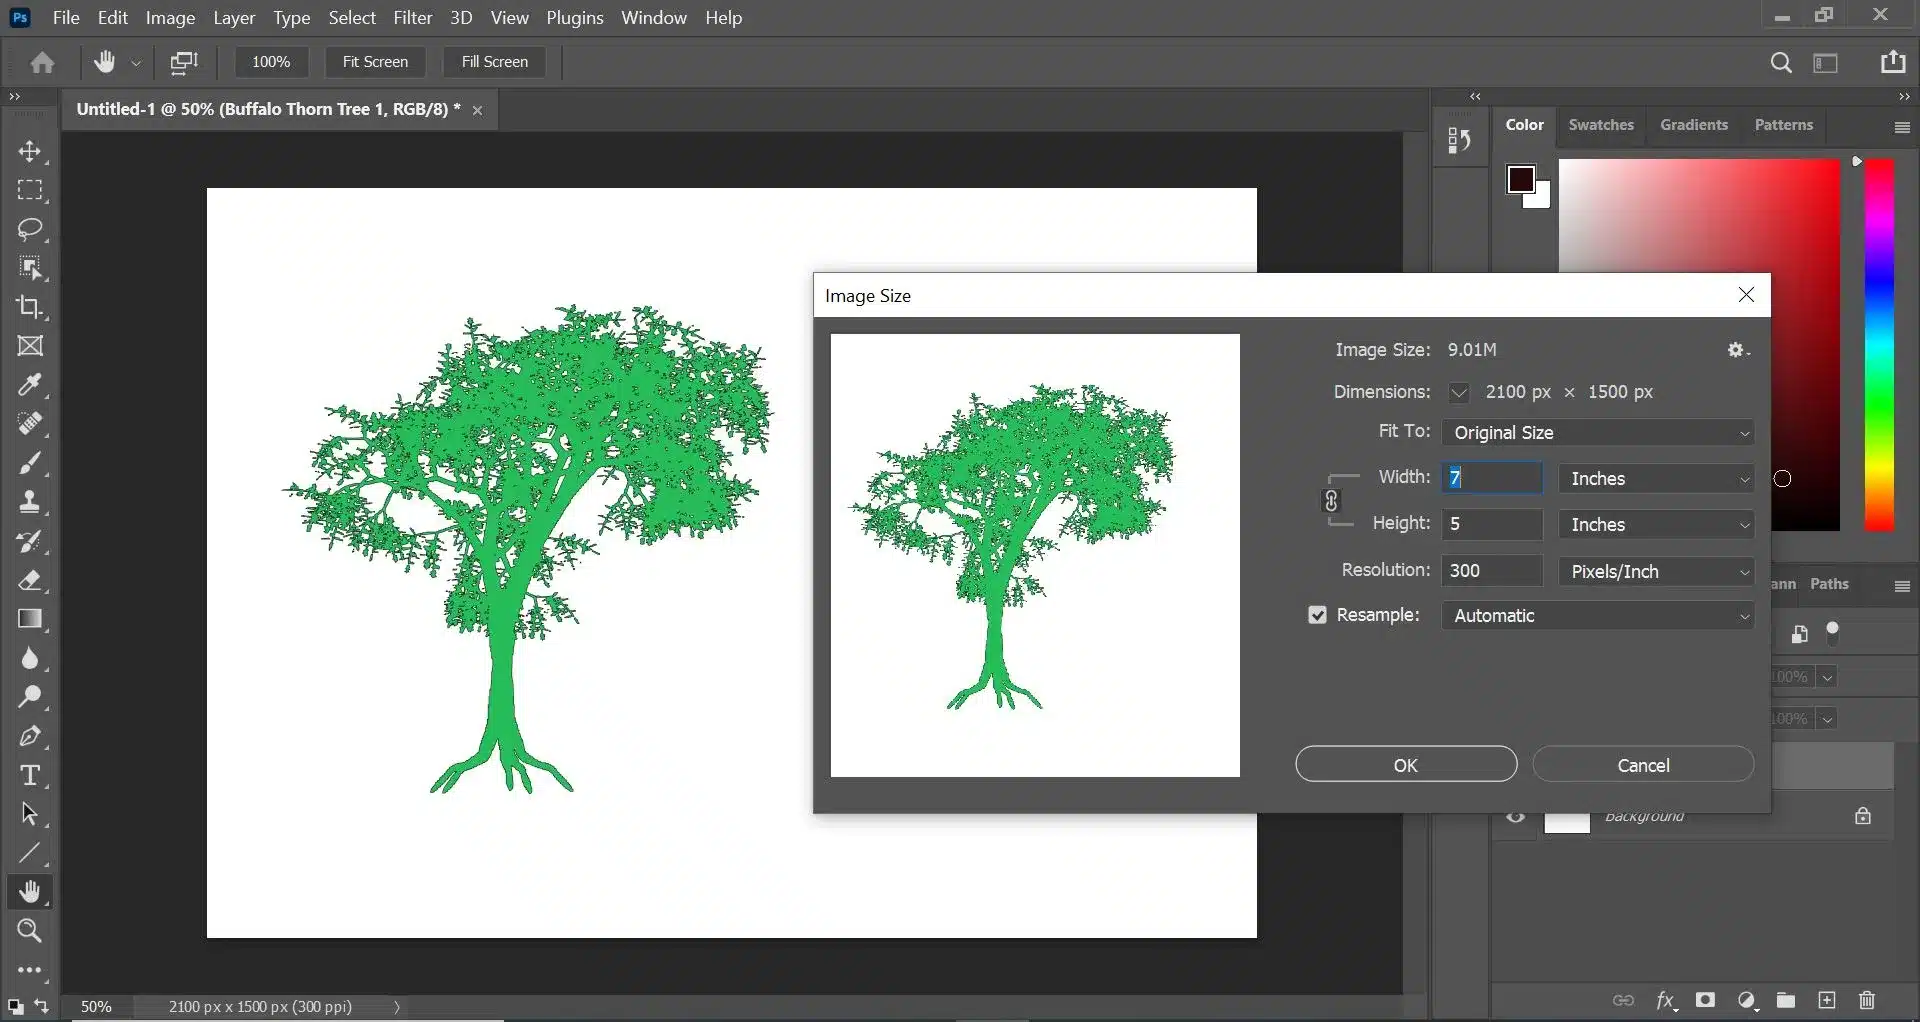 Adobe Photoshop interface showing a tree graphic with the image size dialog box open, adjusting dimensions and resolution settings.